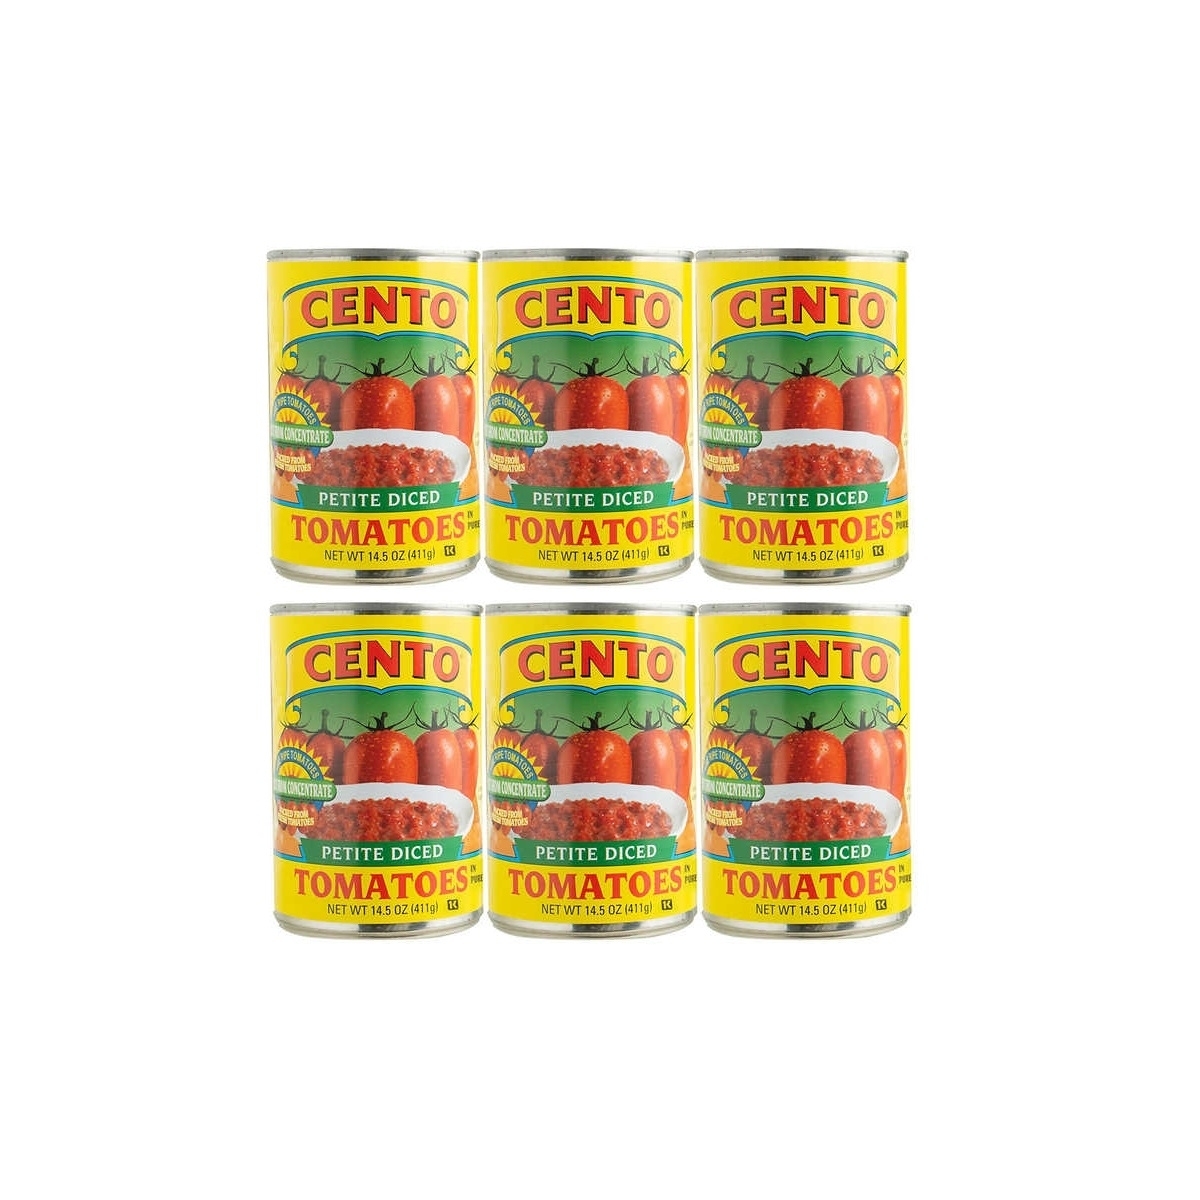 Cento Petite Diced Tomatoes, 14.5 Ounce (Pack of 6) - image 1 of 5